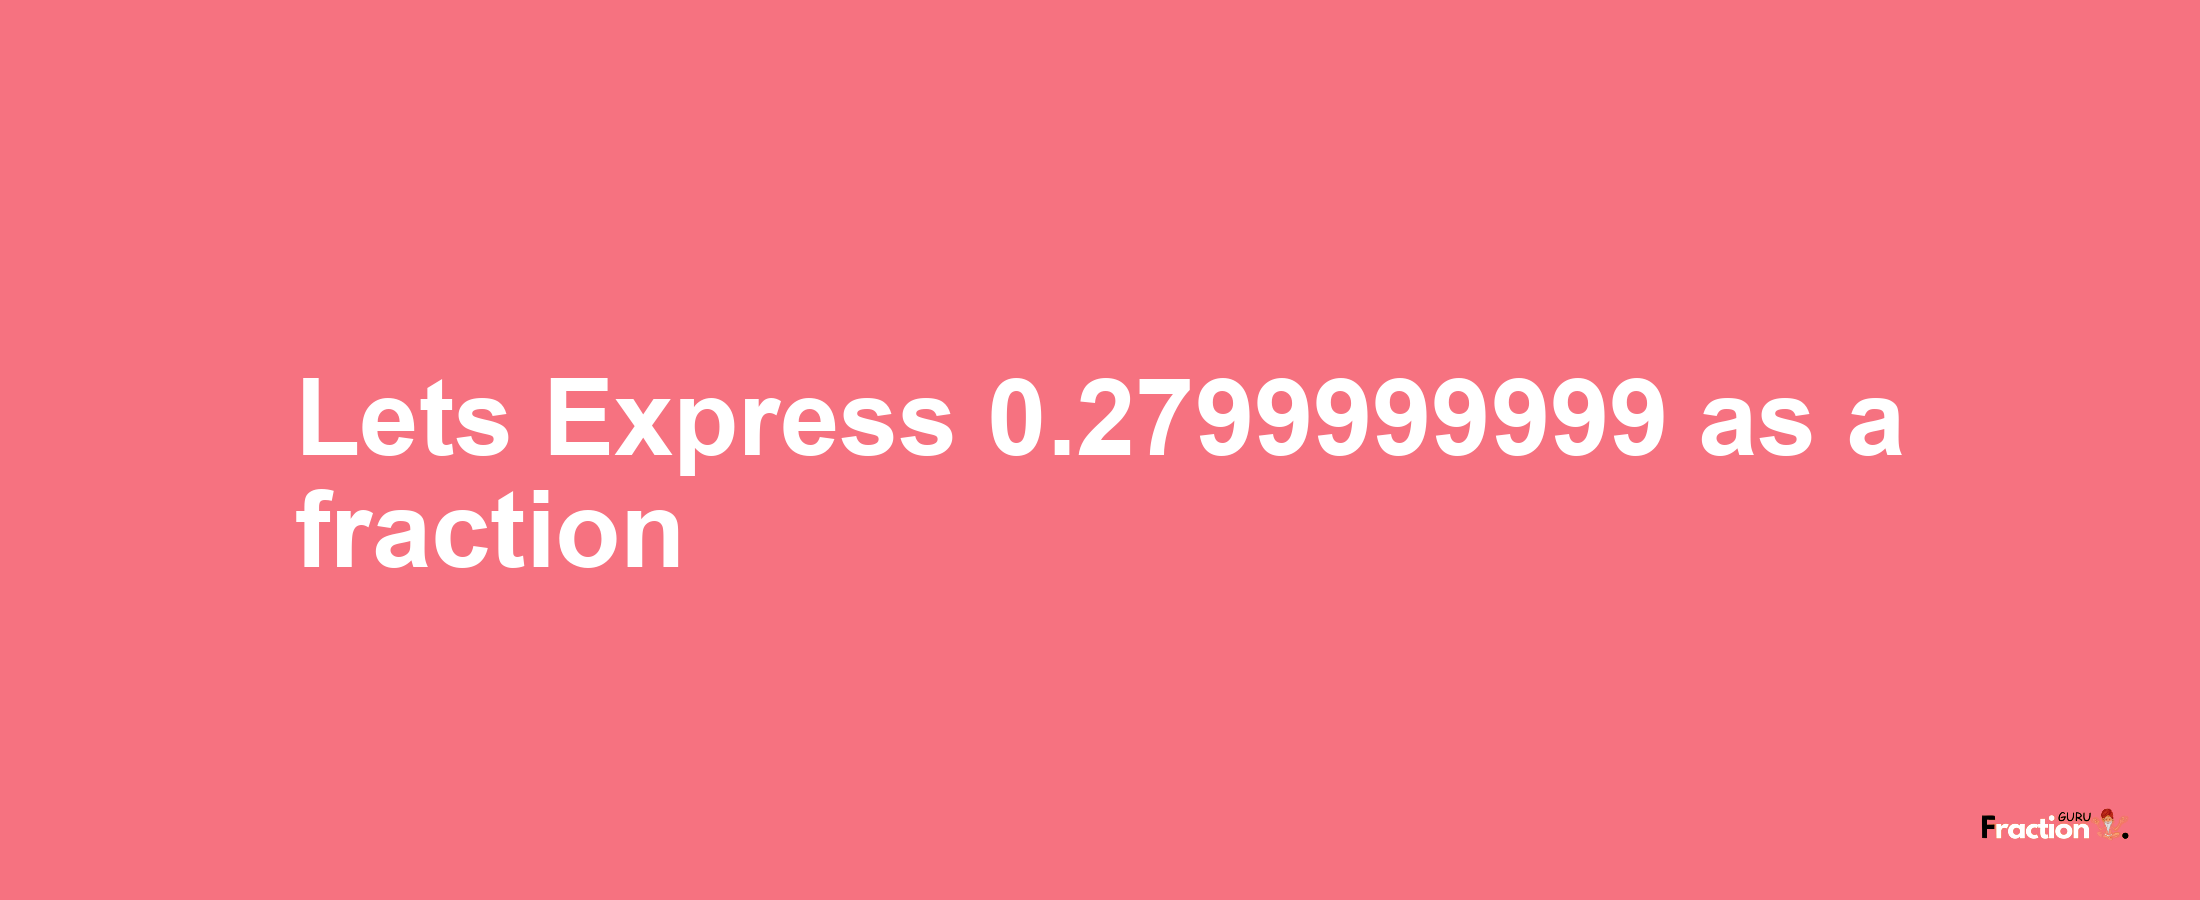 Lets Express 0.2799999999 as afraction